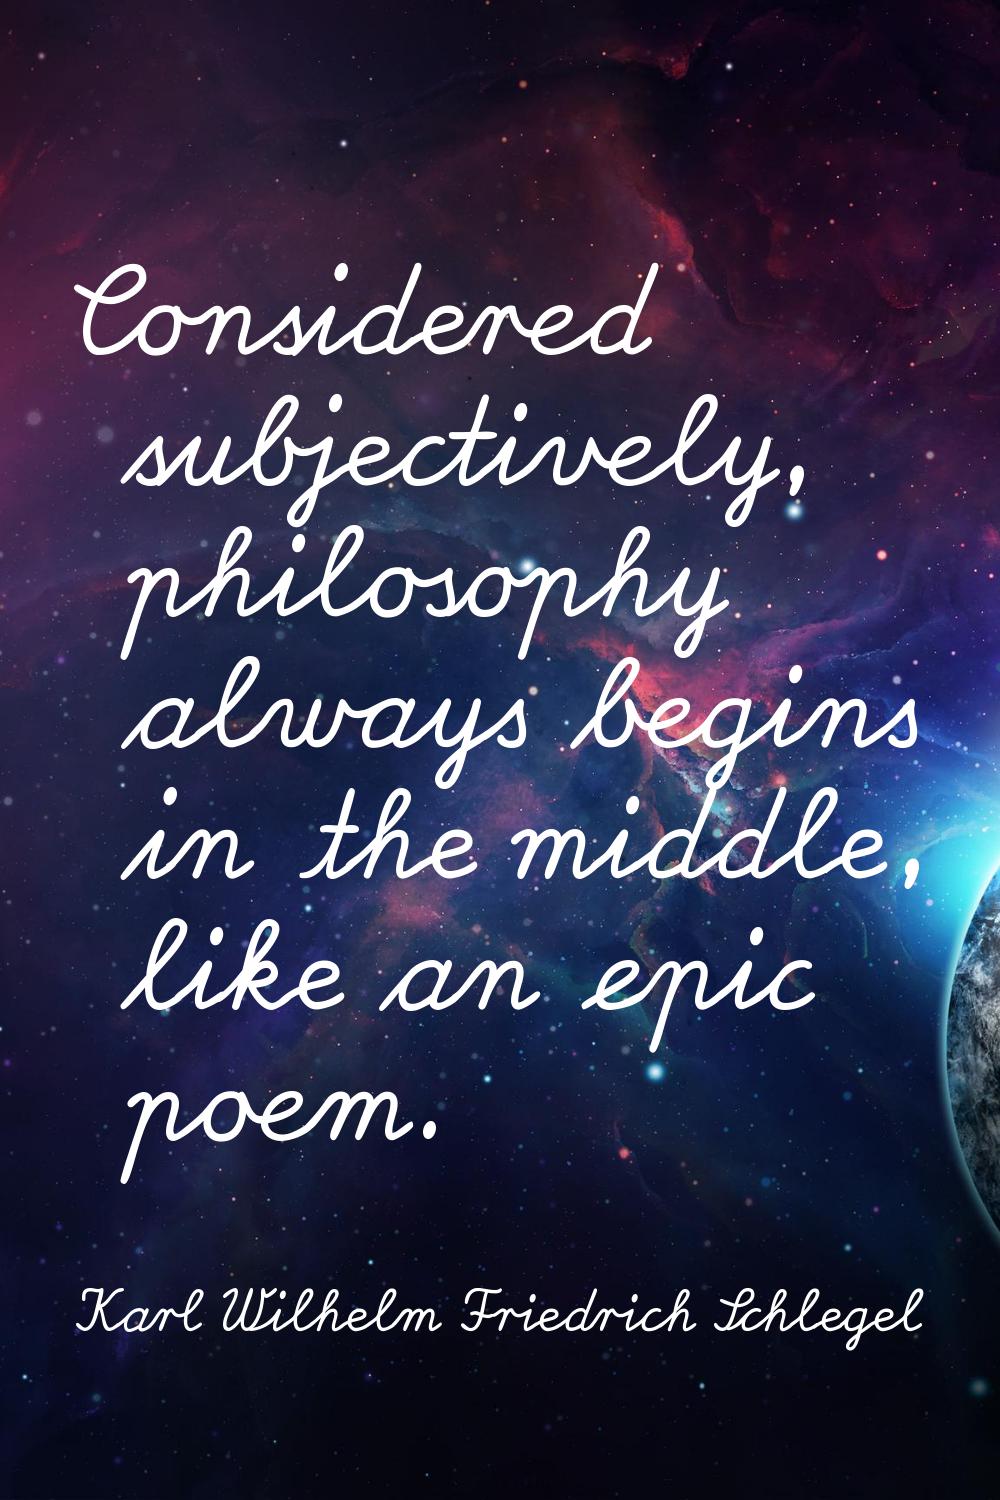 Considered subjectively, philosophy always begins in the middle, like an epic poem.